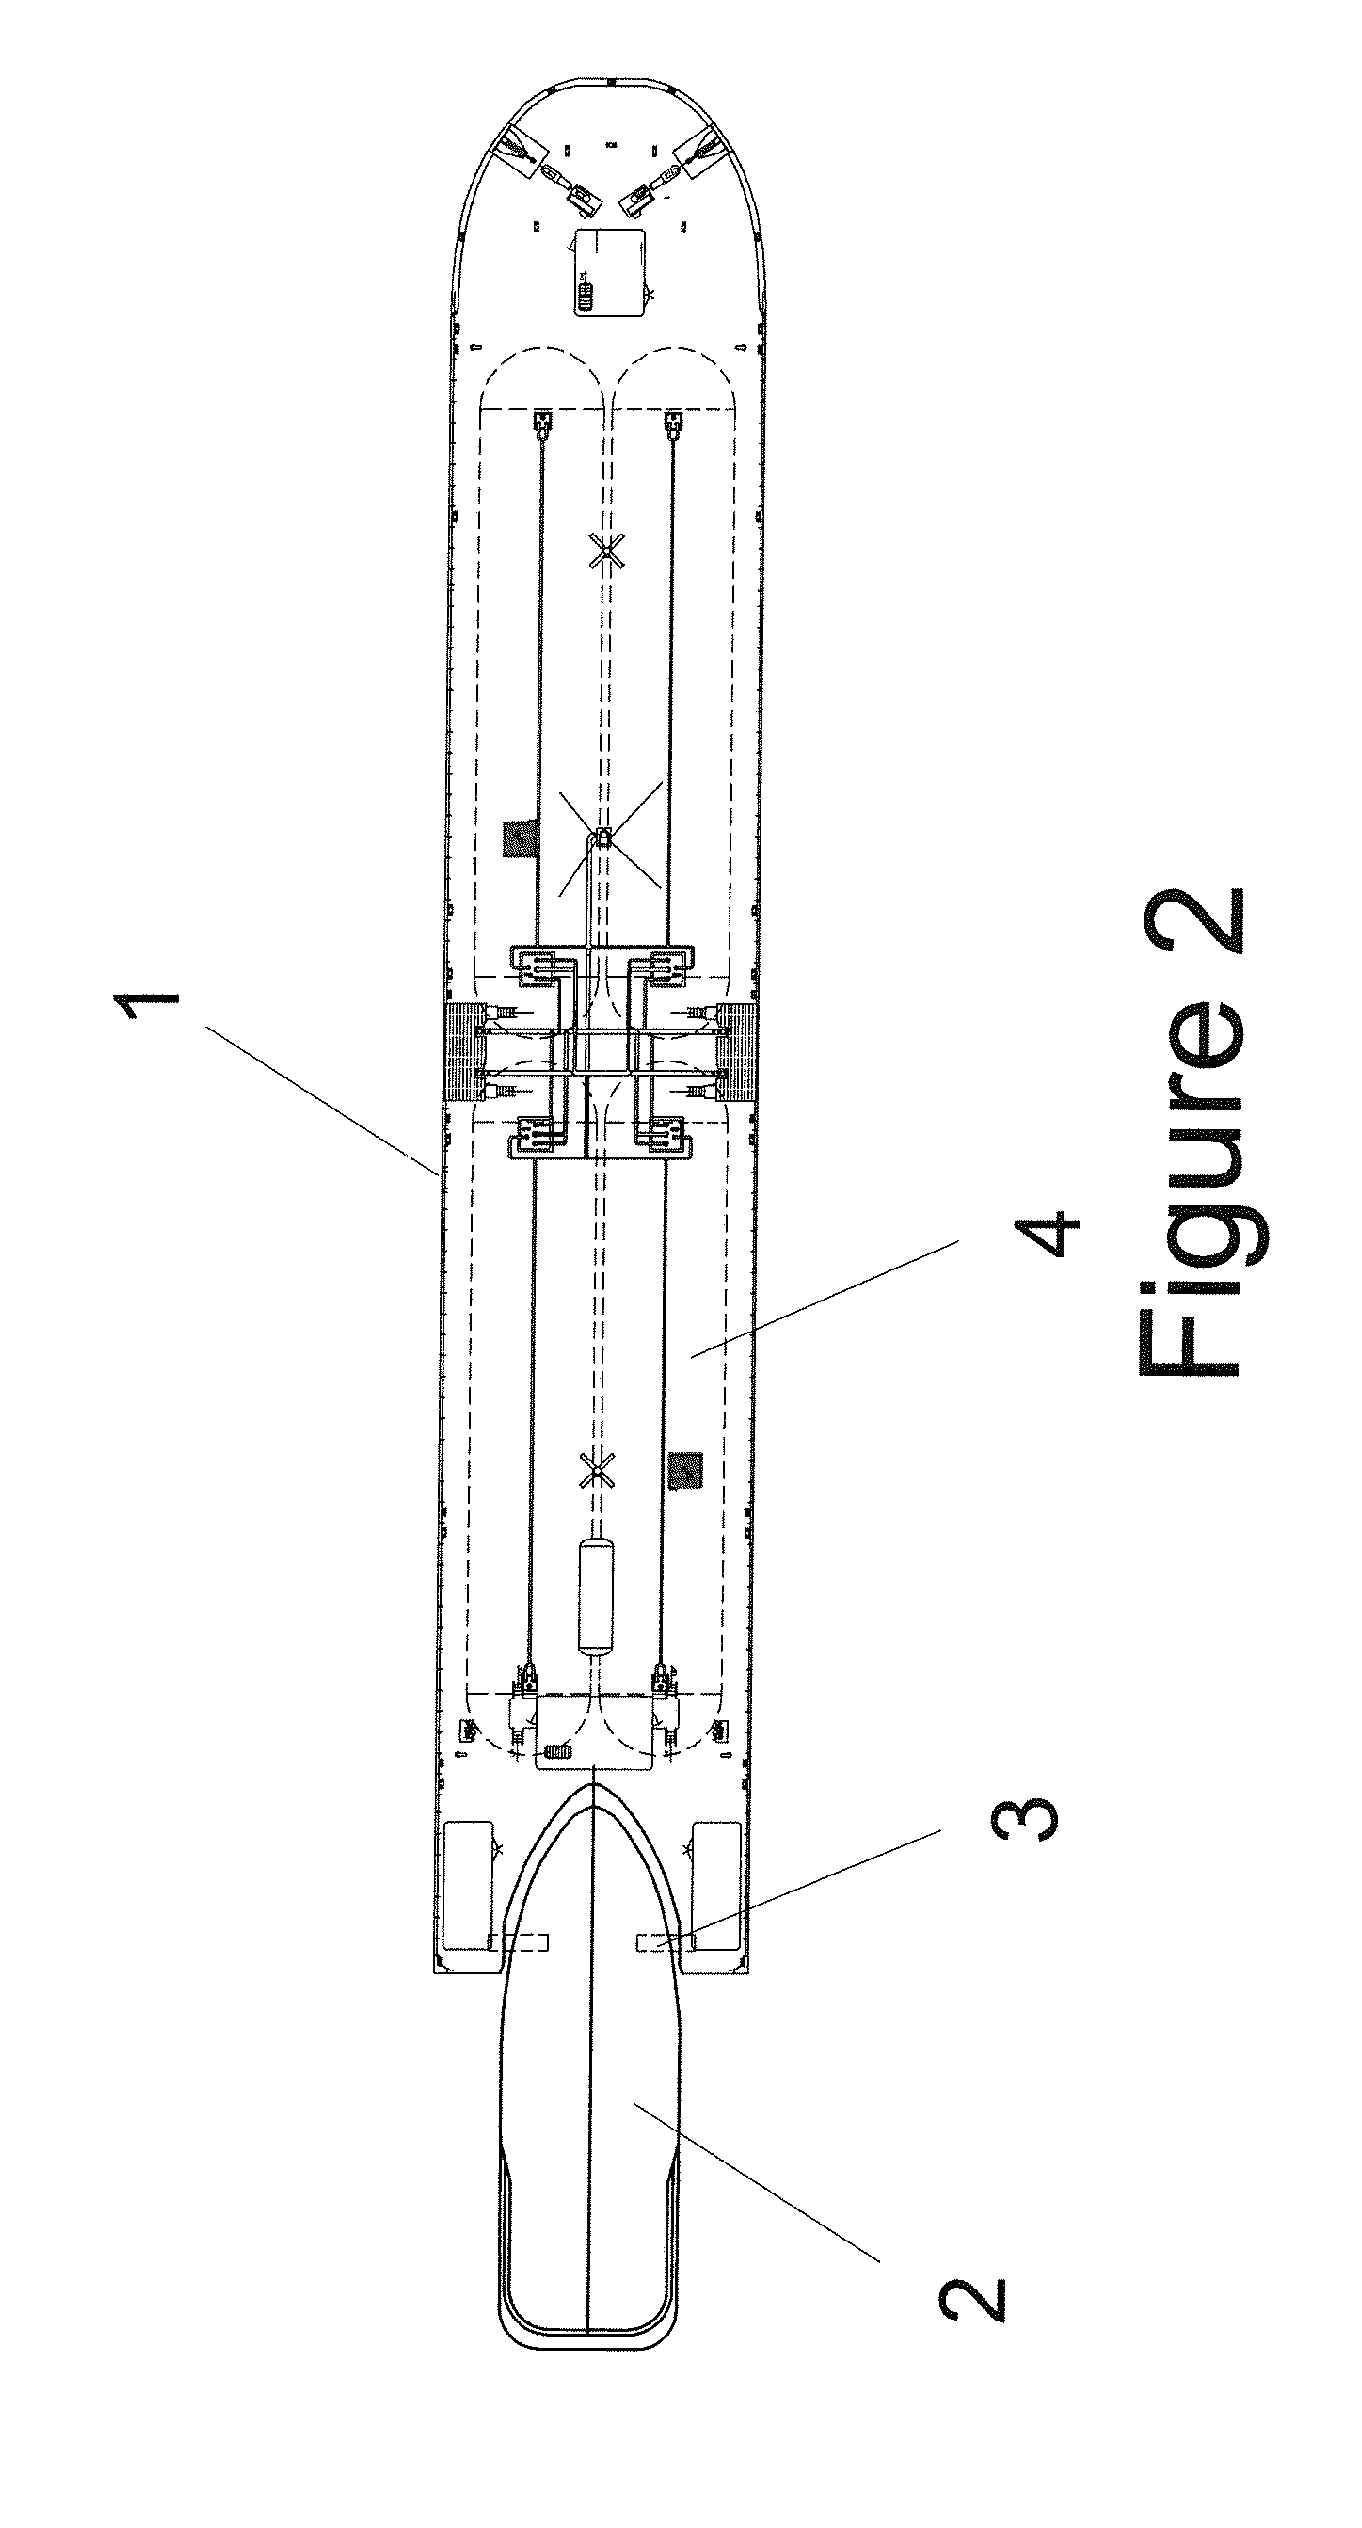 System and method for transferring natural gas for utilization as a fuel